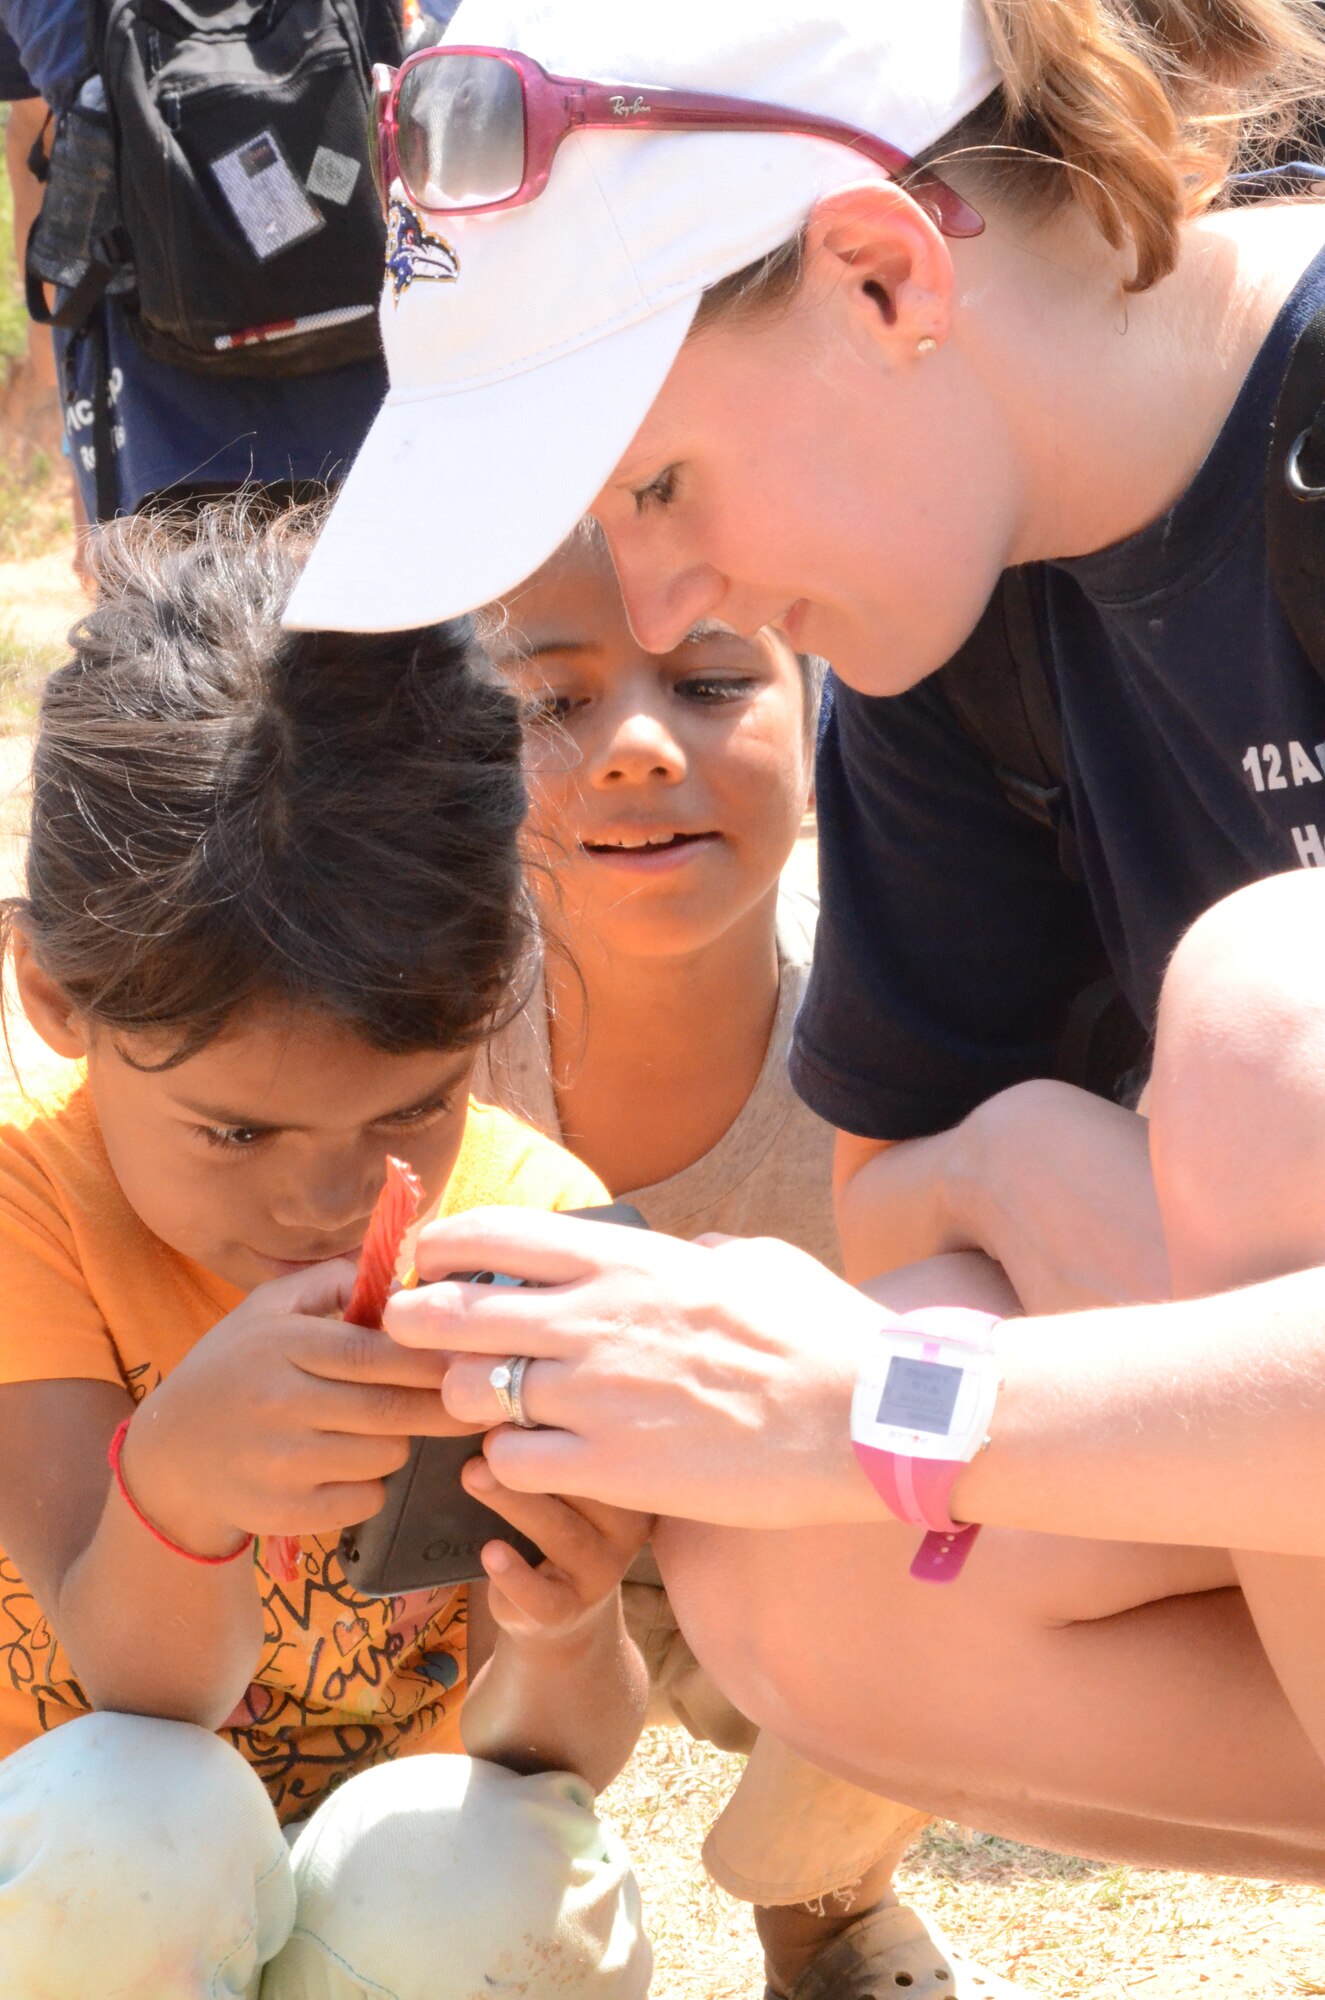 A Joint Task Force service member shares some licorice and shows pictures to a Honduran girl.  More than 130 members of Joint Task Force-Bravo completed a 6.2 mile round trip hike to deliver more than 3,000 pounds of food and supplies to families in need in the mountain village, April 12, 2014. During the more than three mile trek up the mountain, Task Force members made an elevation gain of 1,600 feet while carrying more than 25 pounds of supplies each. The food and supplies were all purchased with donations made by the members of Joint Task Force-Bravo. (Photo by U. S. Air Force Technical Sgt. Breihan Fetz)